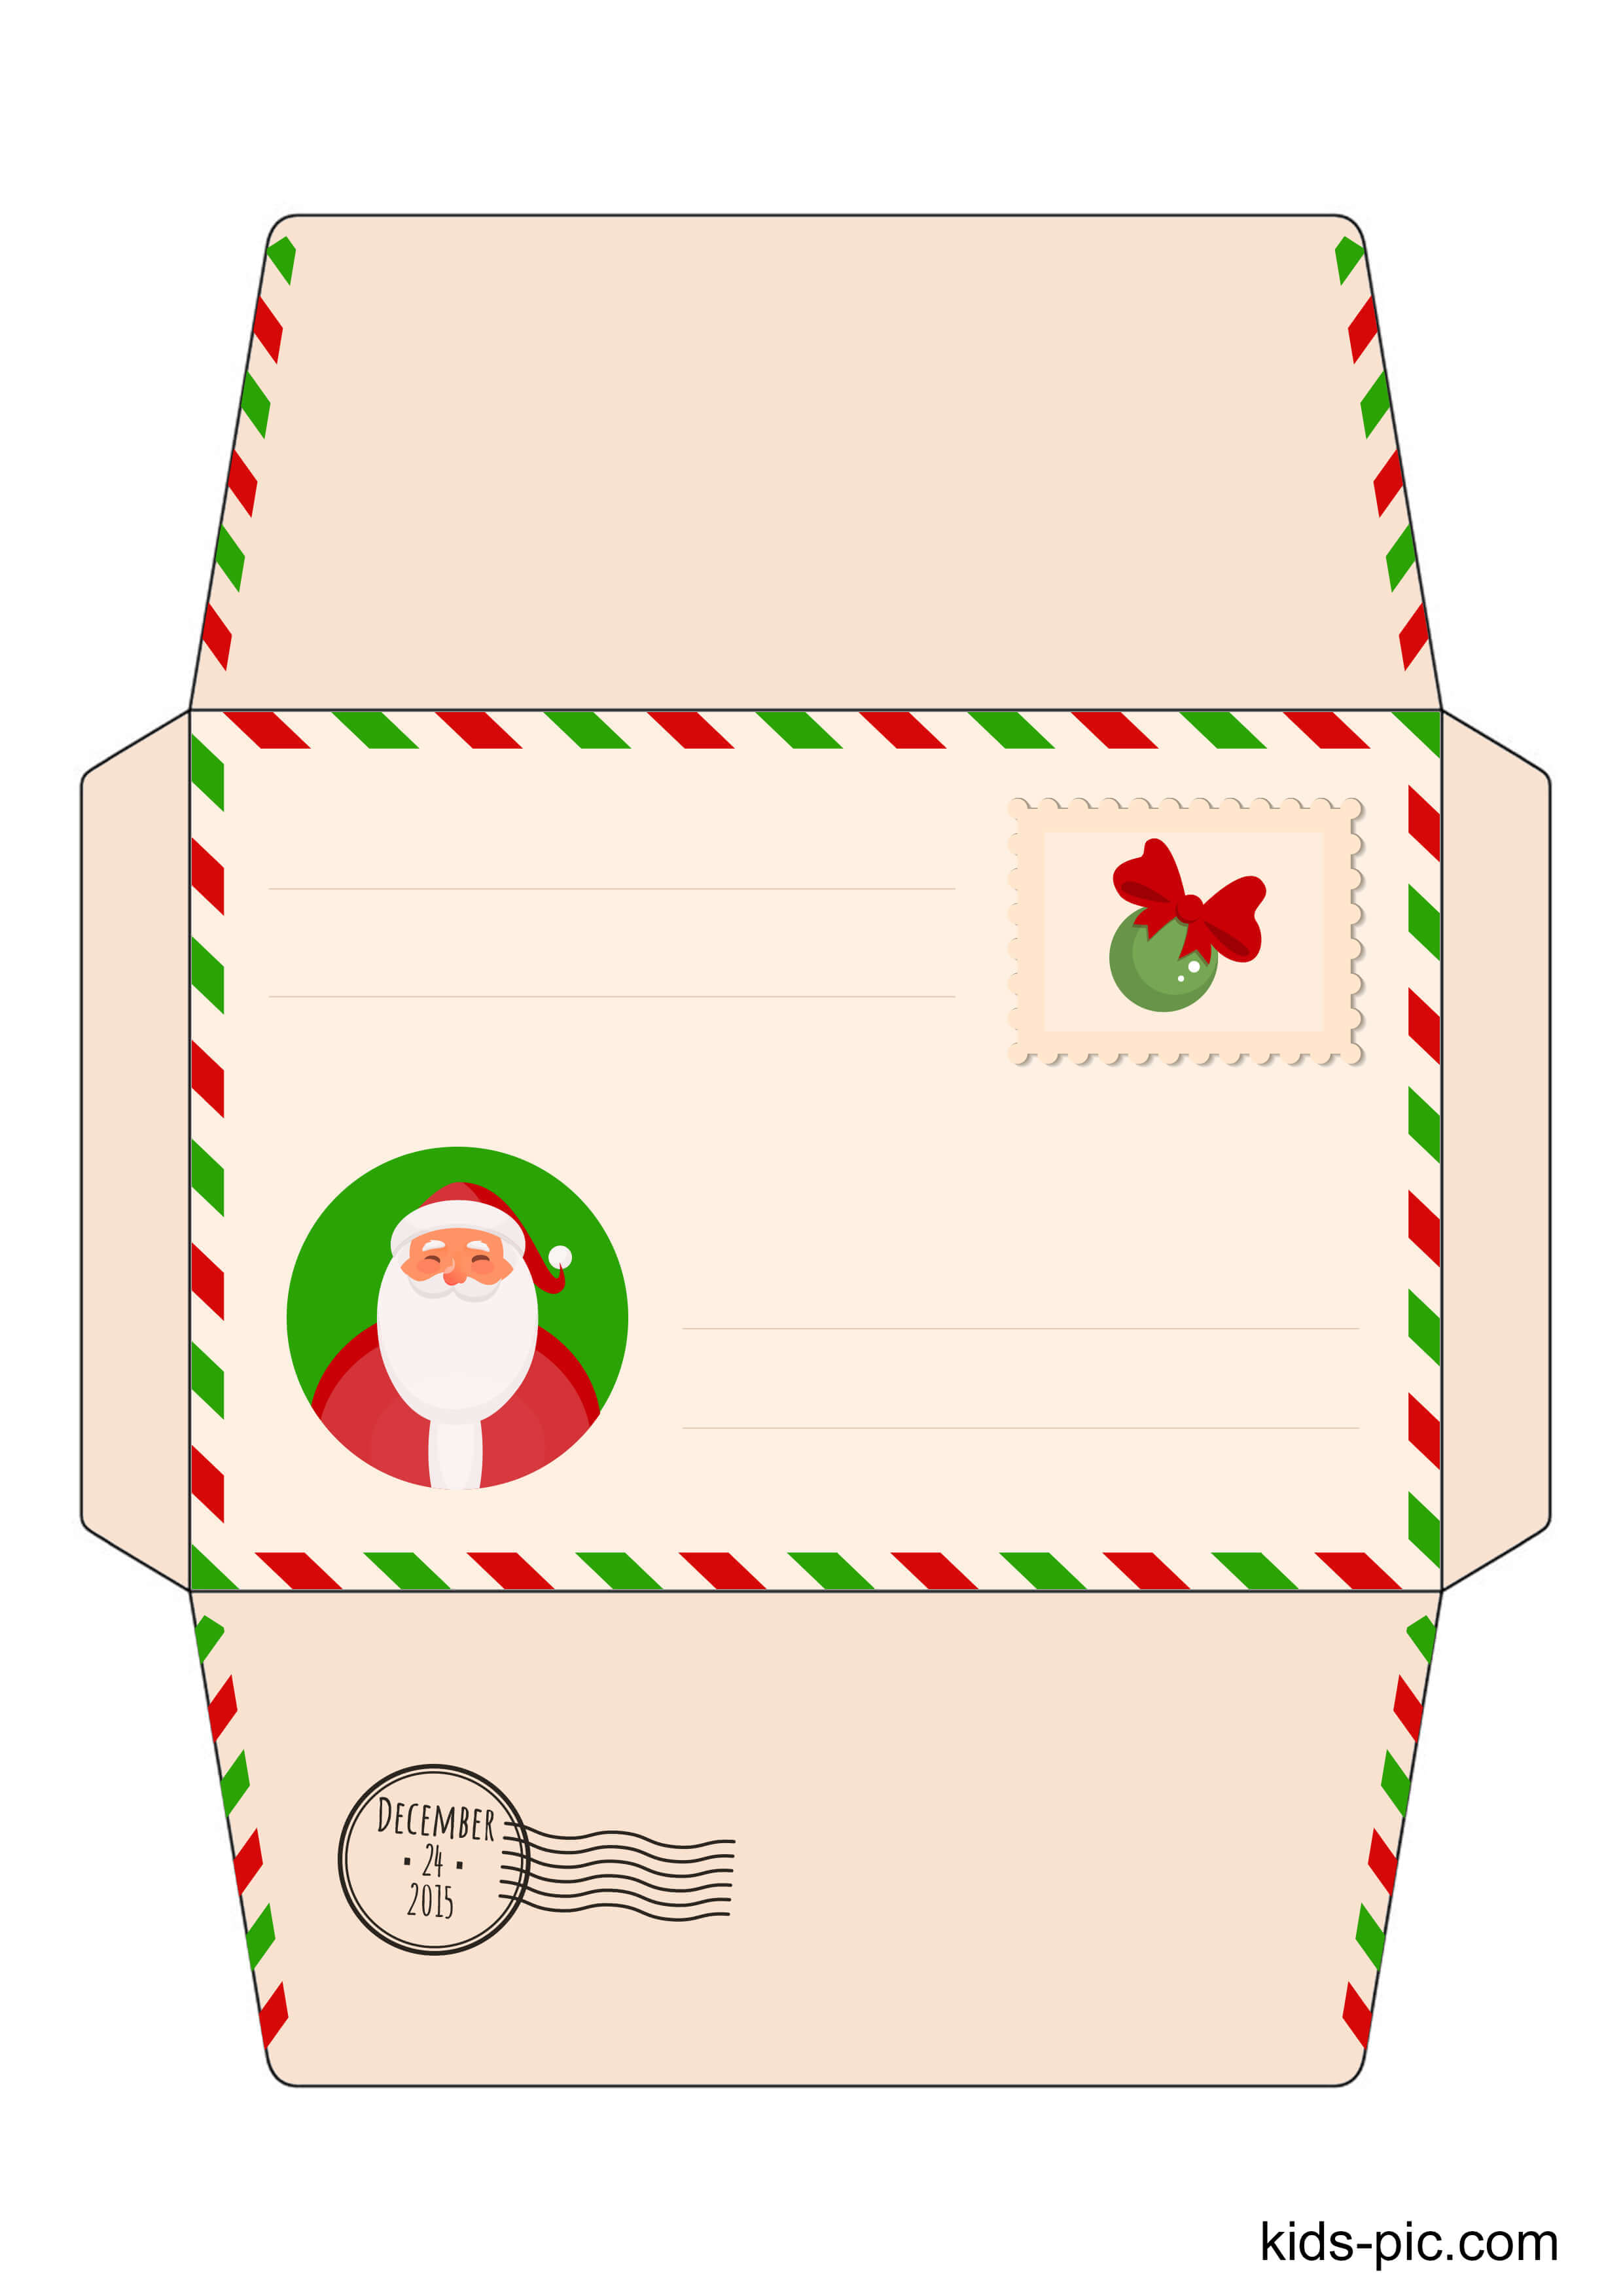 24 Letter Envelope Template To From Santa Kids Pic Com